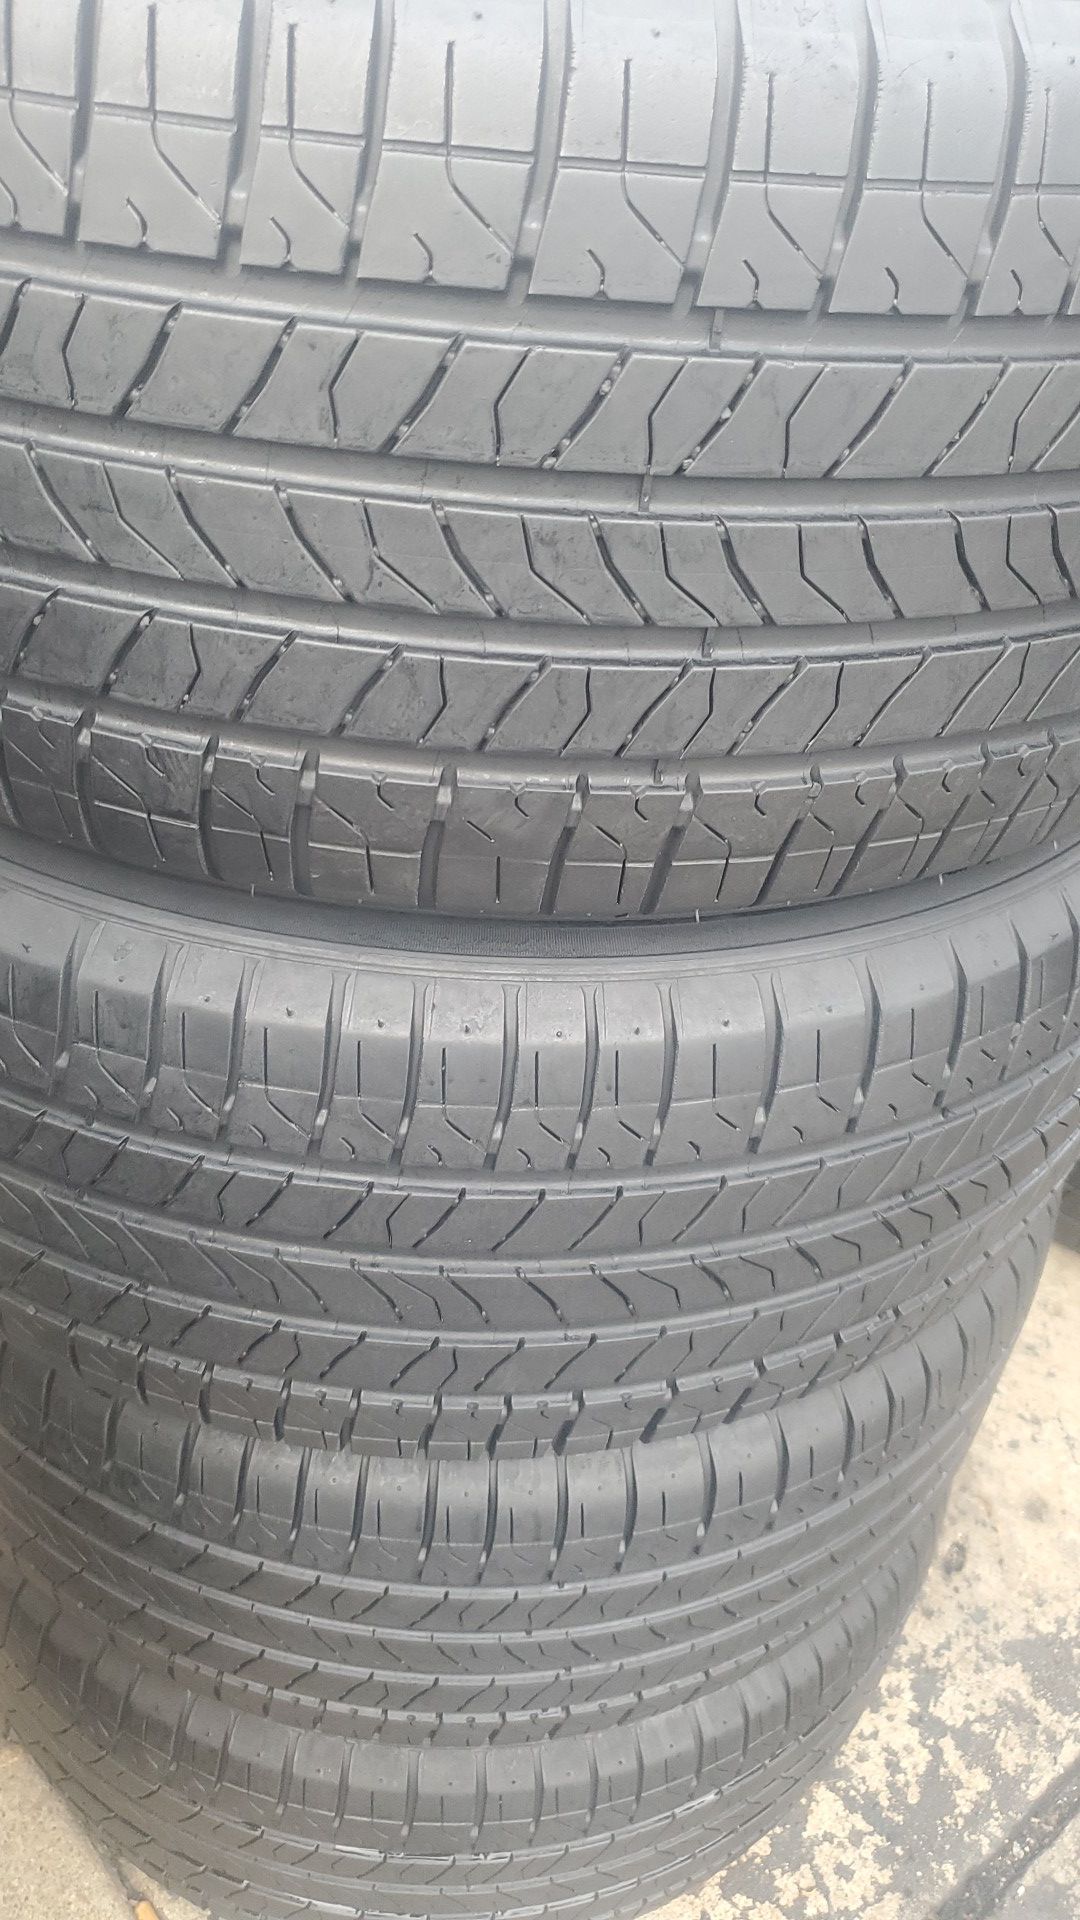 Four very nice MICHELIN tires for sale. 235/50/17